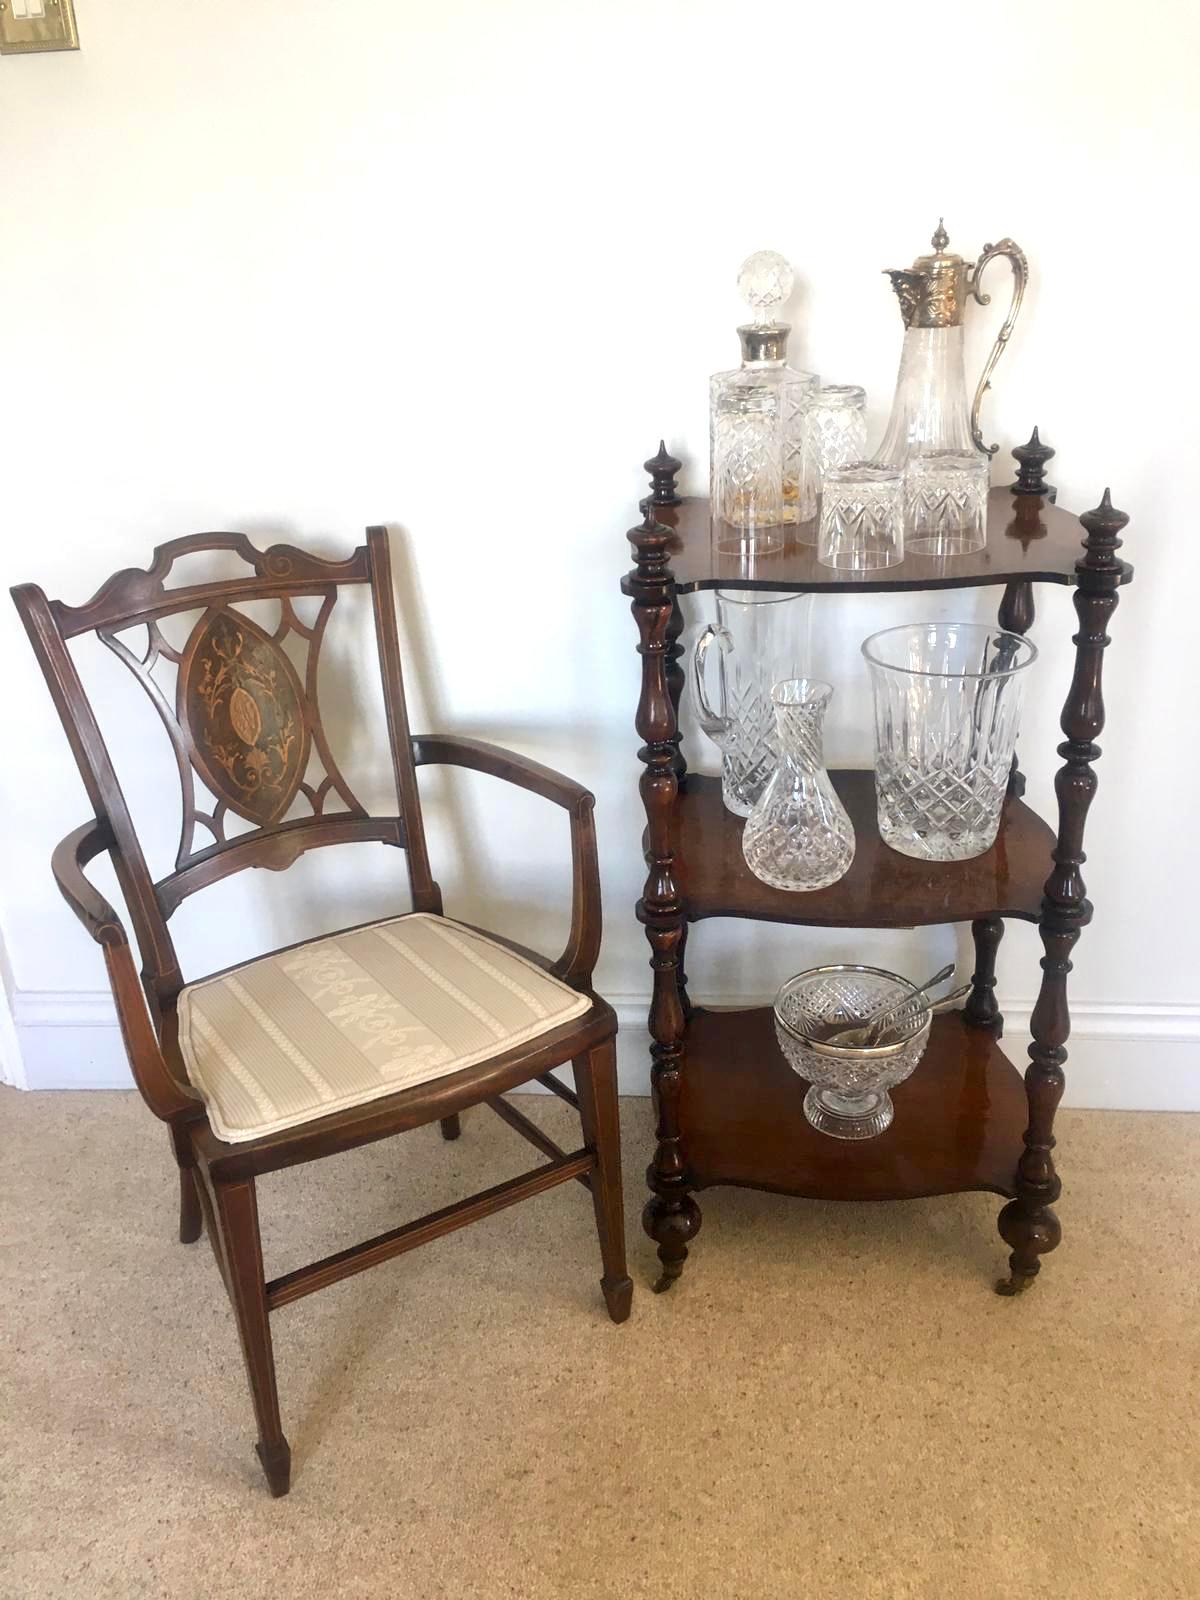 Antique Victorian freestanding rosewood whatnot having three serpentine shaped rosewood shelves supported by eight solid rosewood turned columns and four original turned finials. It stands on turned feet with original brass cup castors.

An